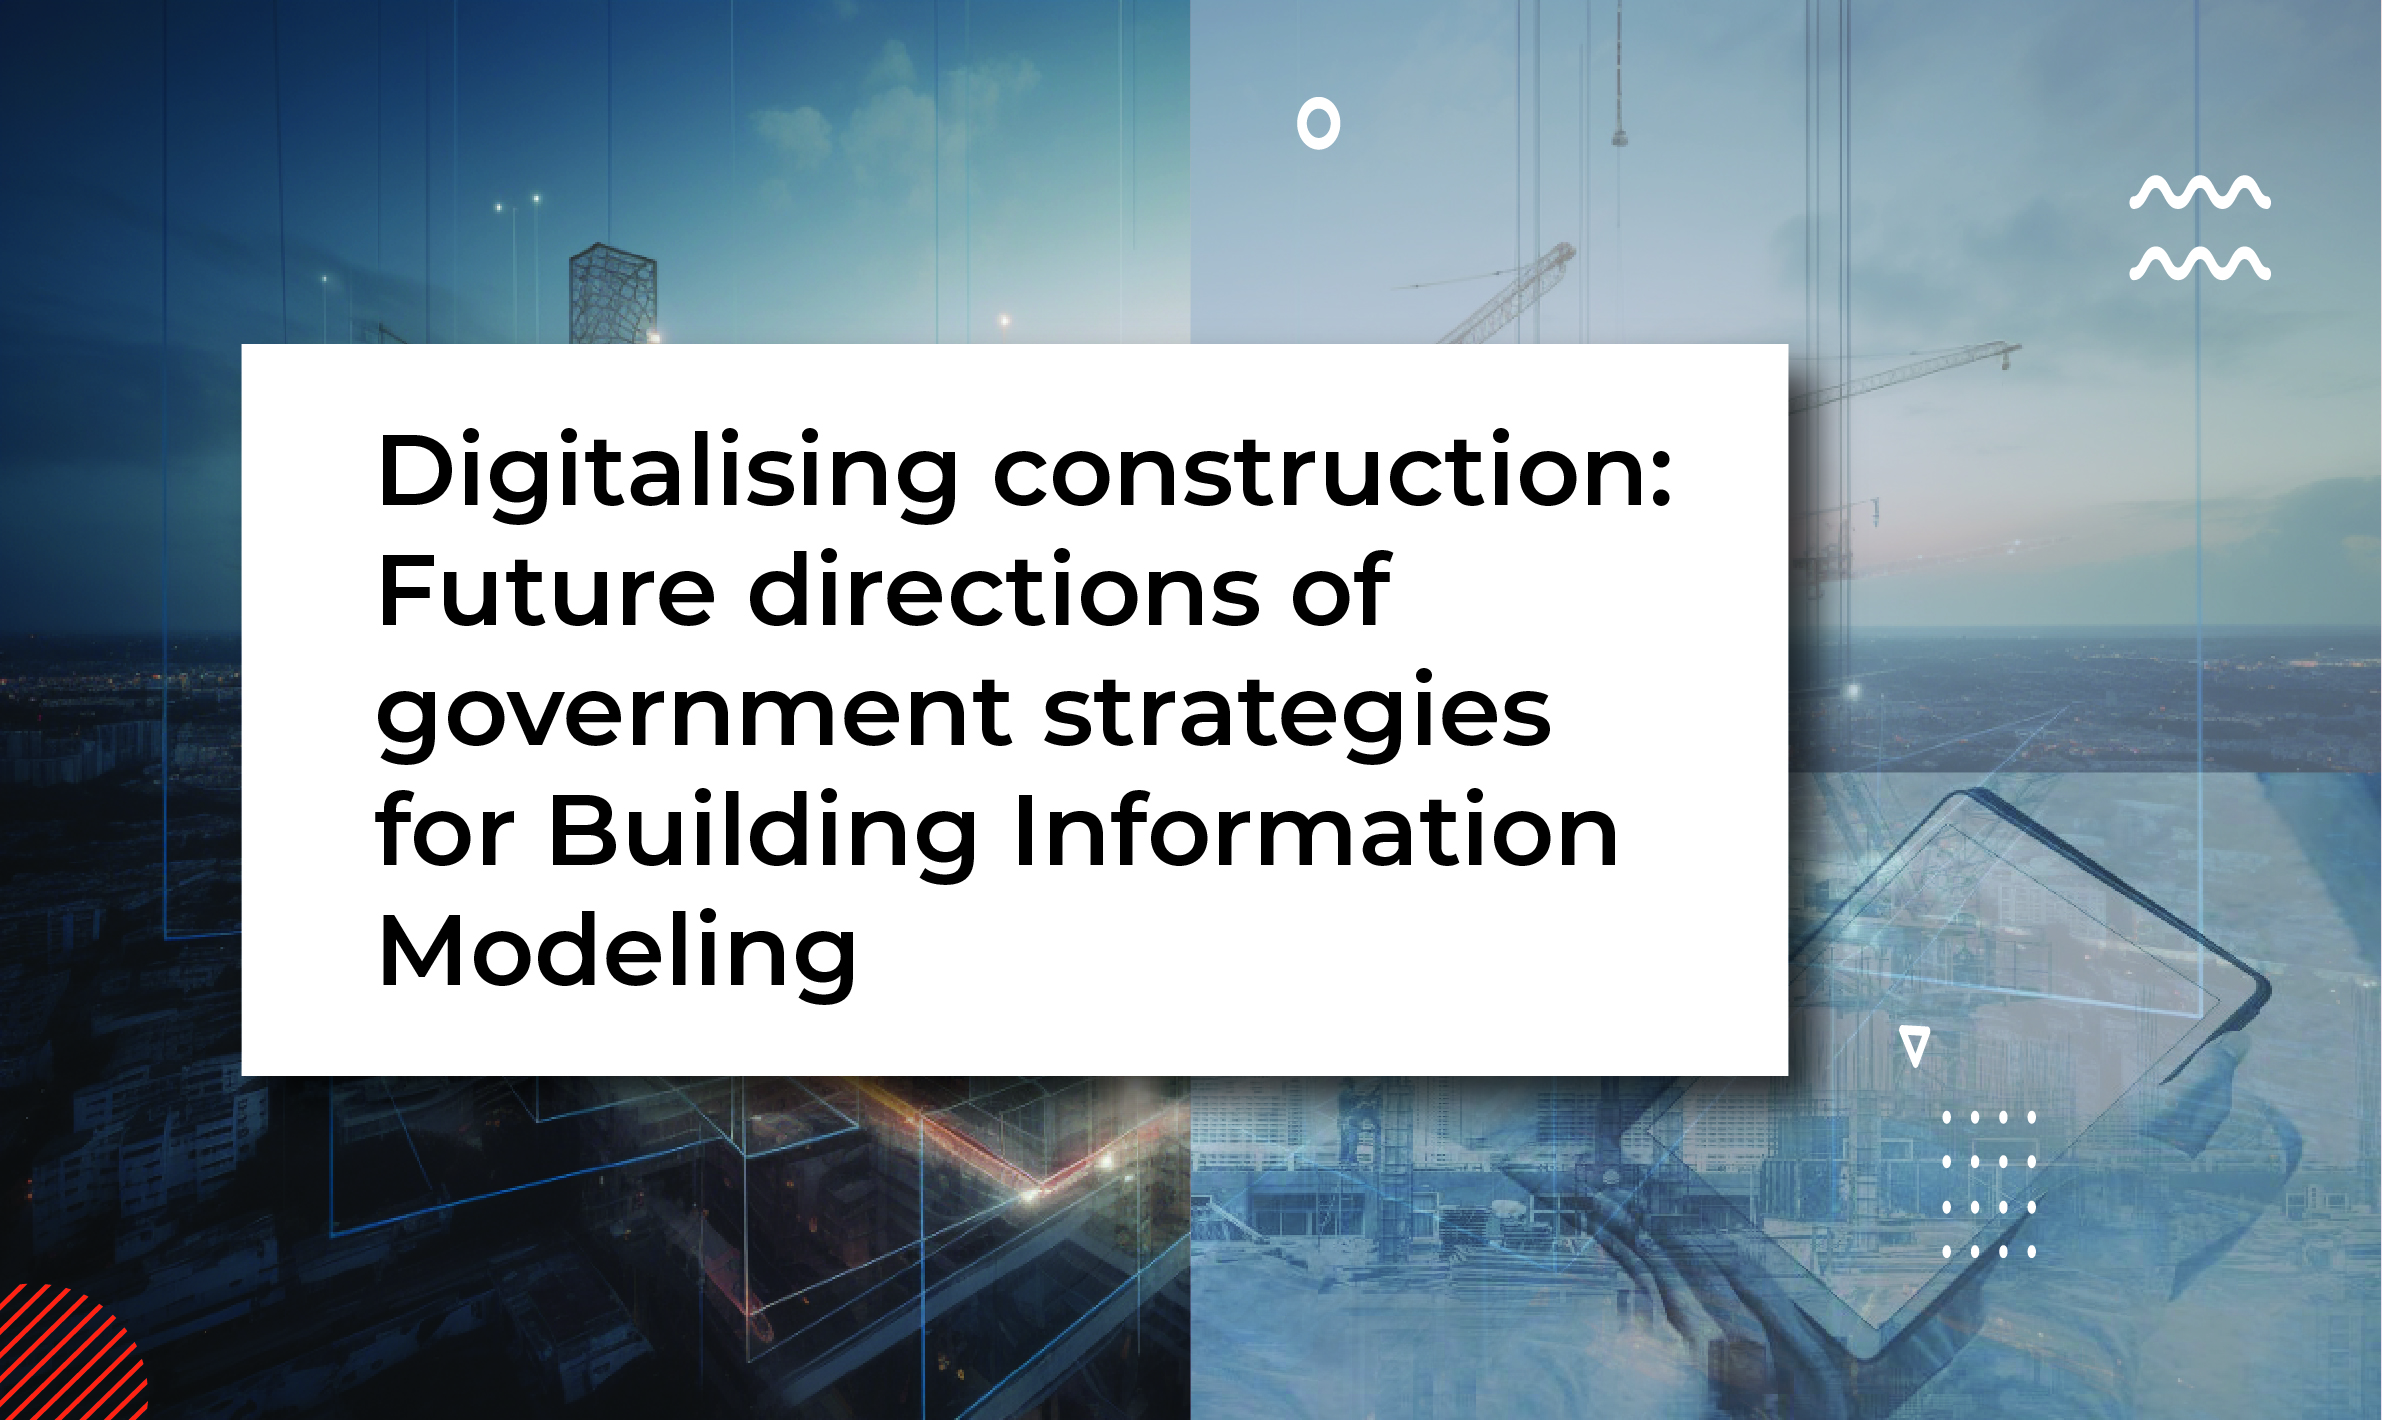 Digitalising construction: Future directions of government strategies for Building Information Modeling